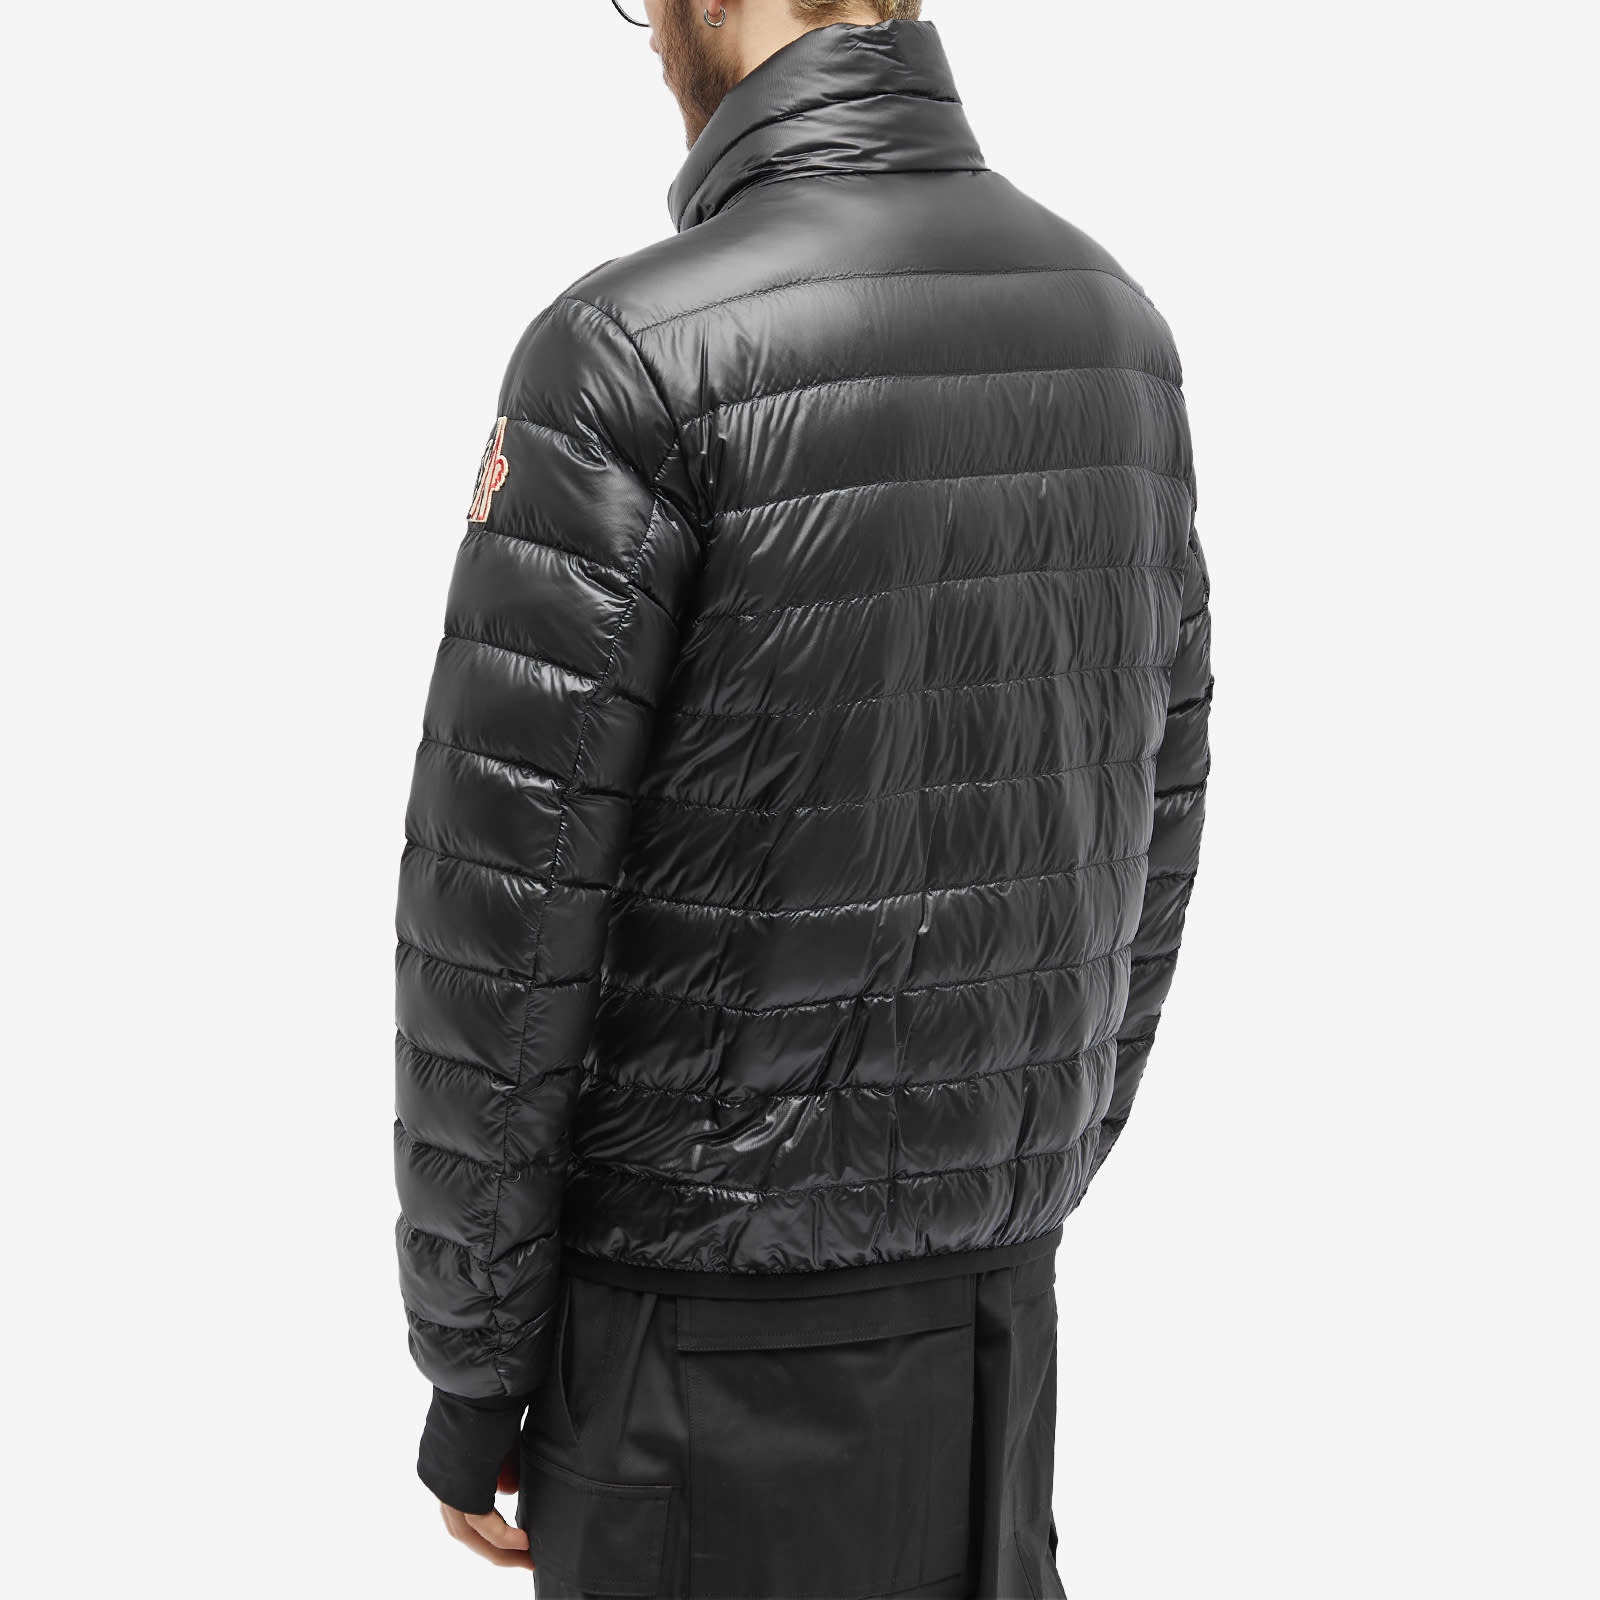 Moncler Grenoble Hers Micro Ripstop Jacket - 3